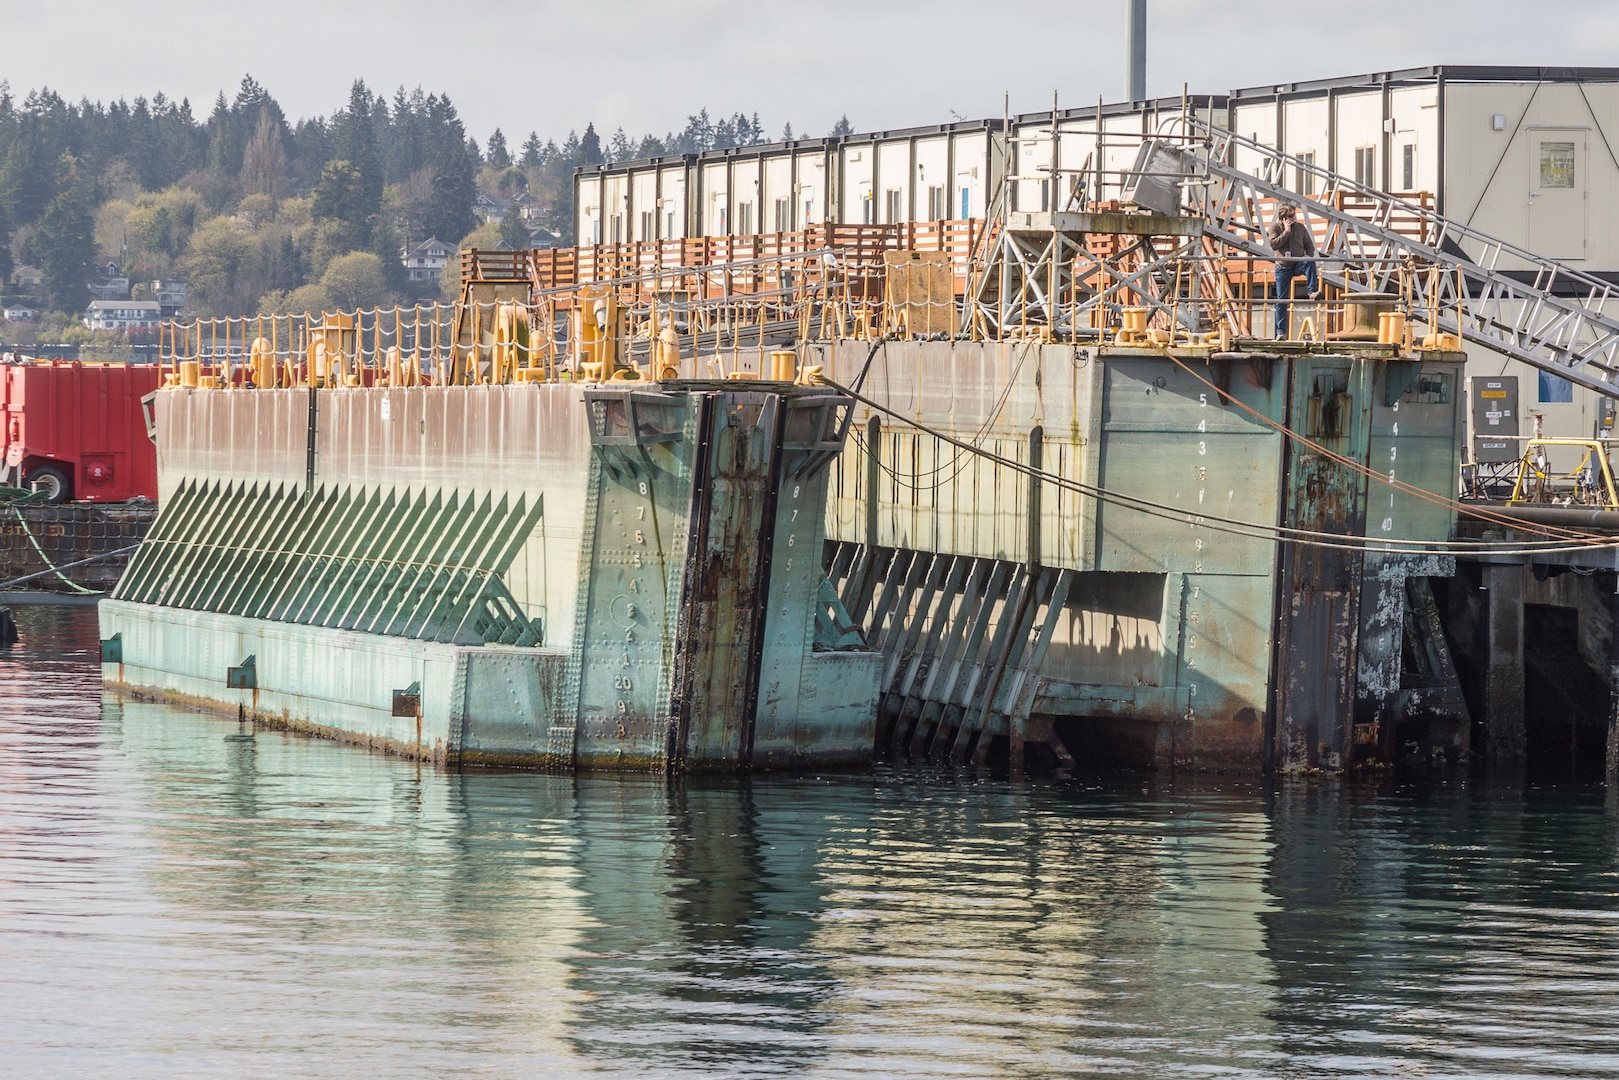 Historic caissons 2 and 3 seen at Puget Sound Naval Shipyard & Intermediate Maintenance Facility in Bremerton, Wash., in 2018. The watercraft are currently being offered for sale through the Defense Logistics Agency's disposition services.